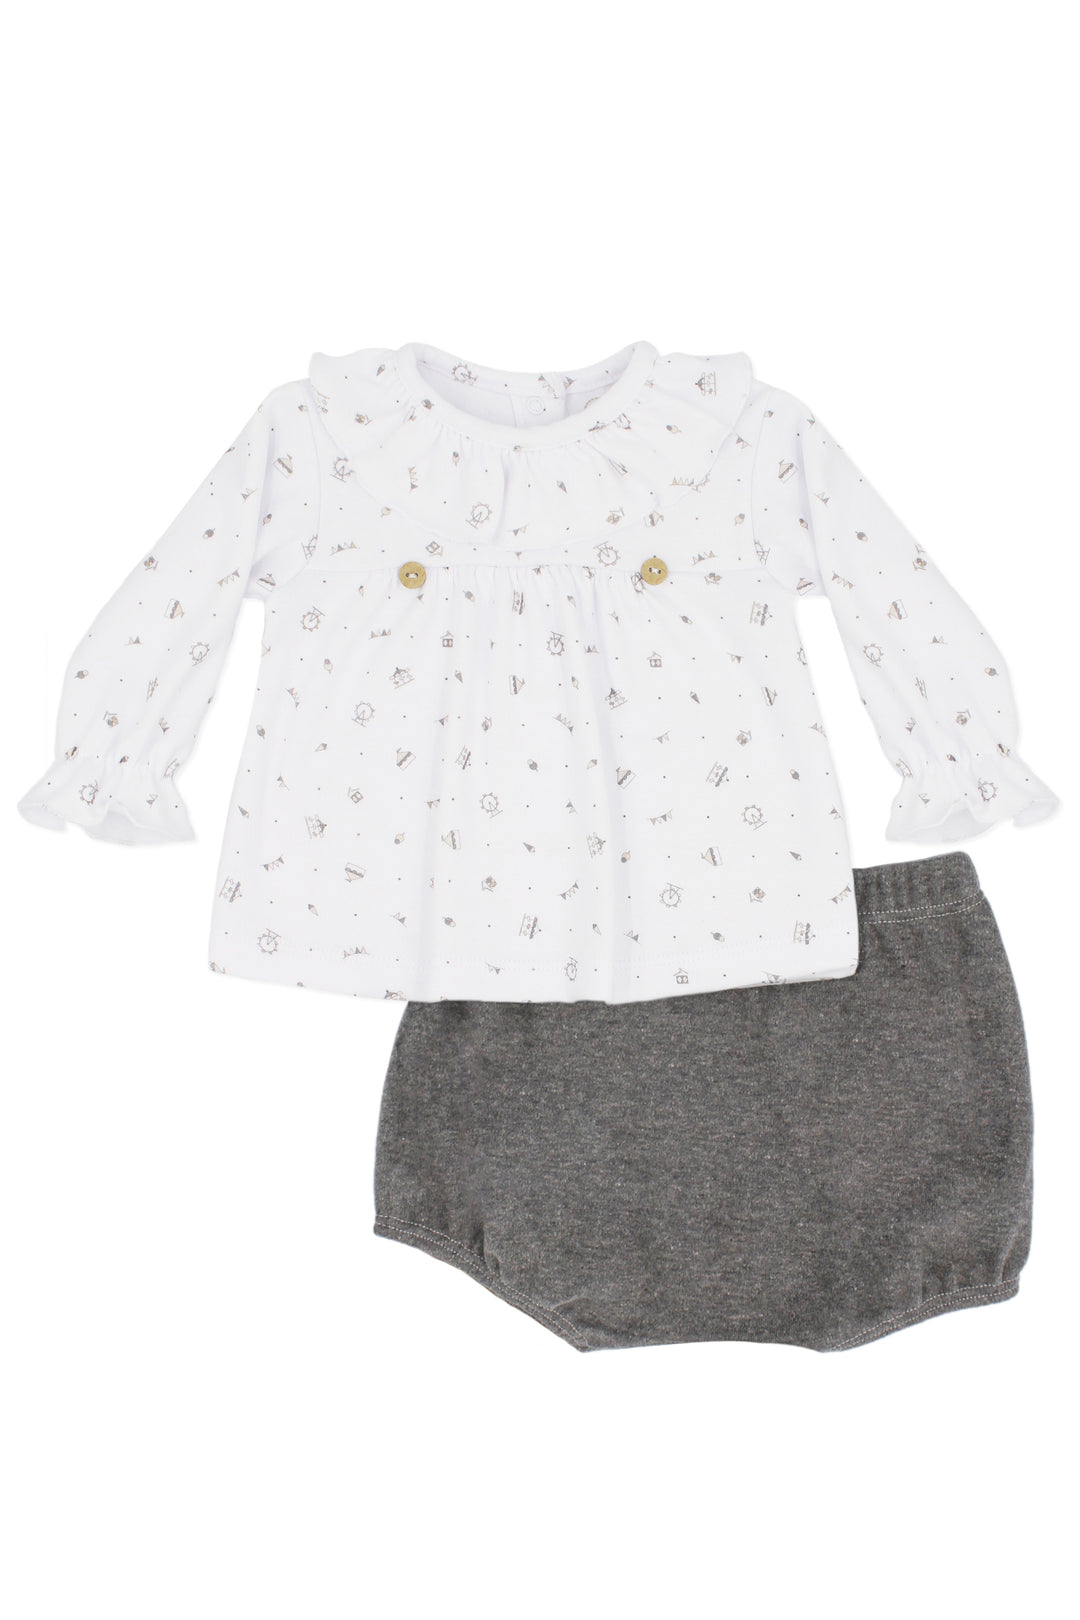 Rapife "Ivy" Grey Fairground Print Blouse & Bloomers | Millie and John